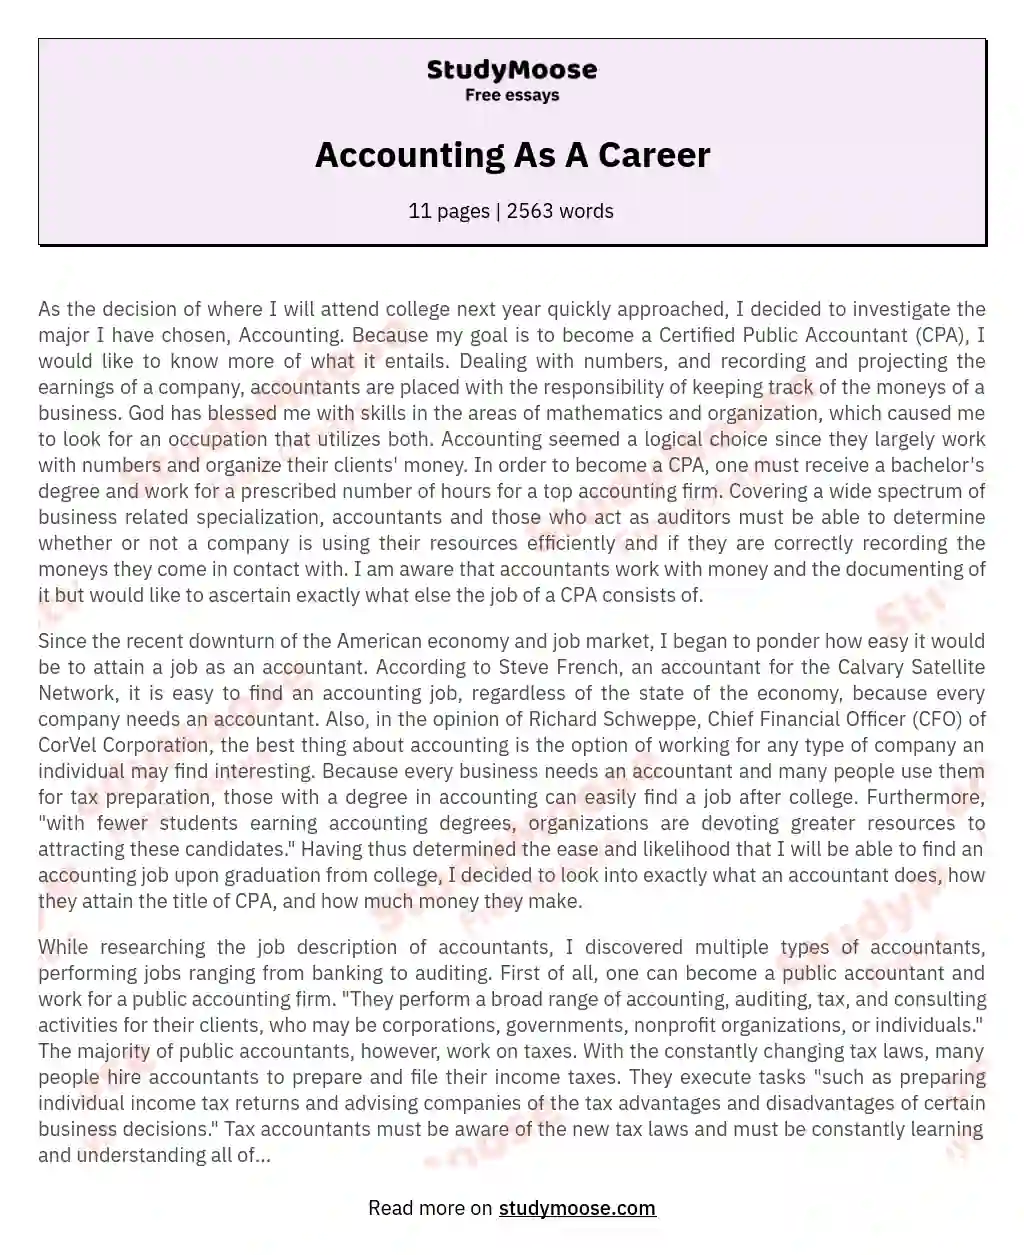 Accounting As A Career essay